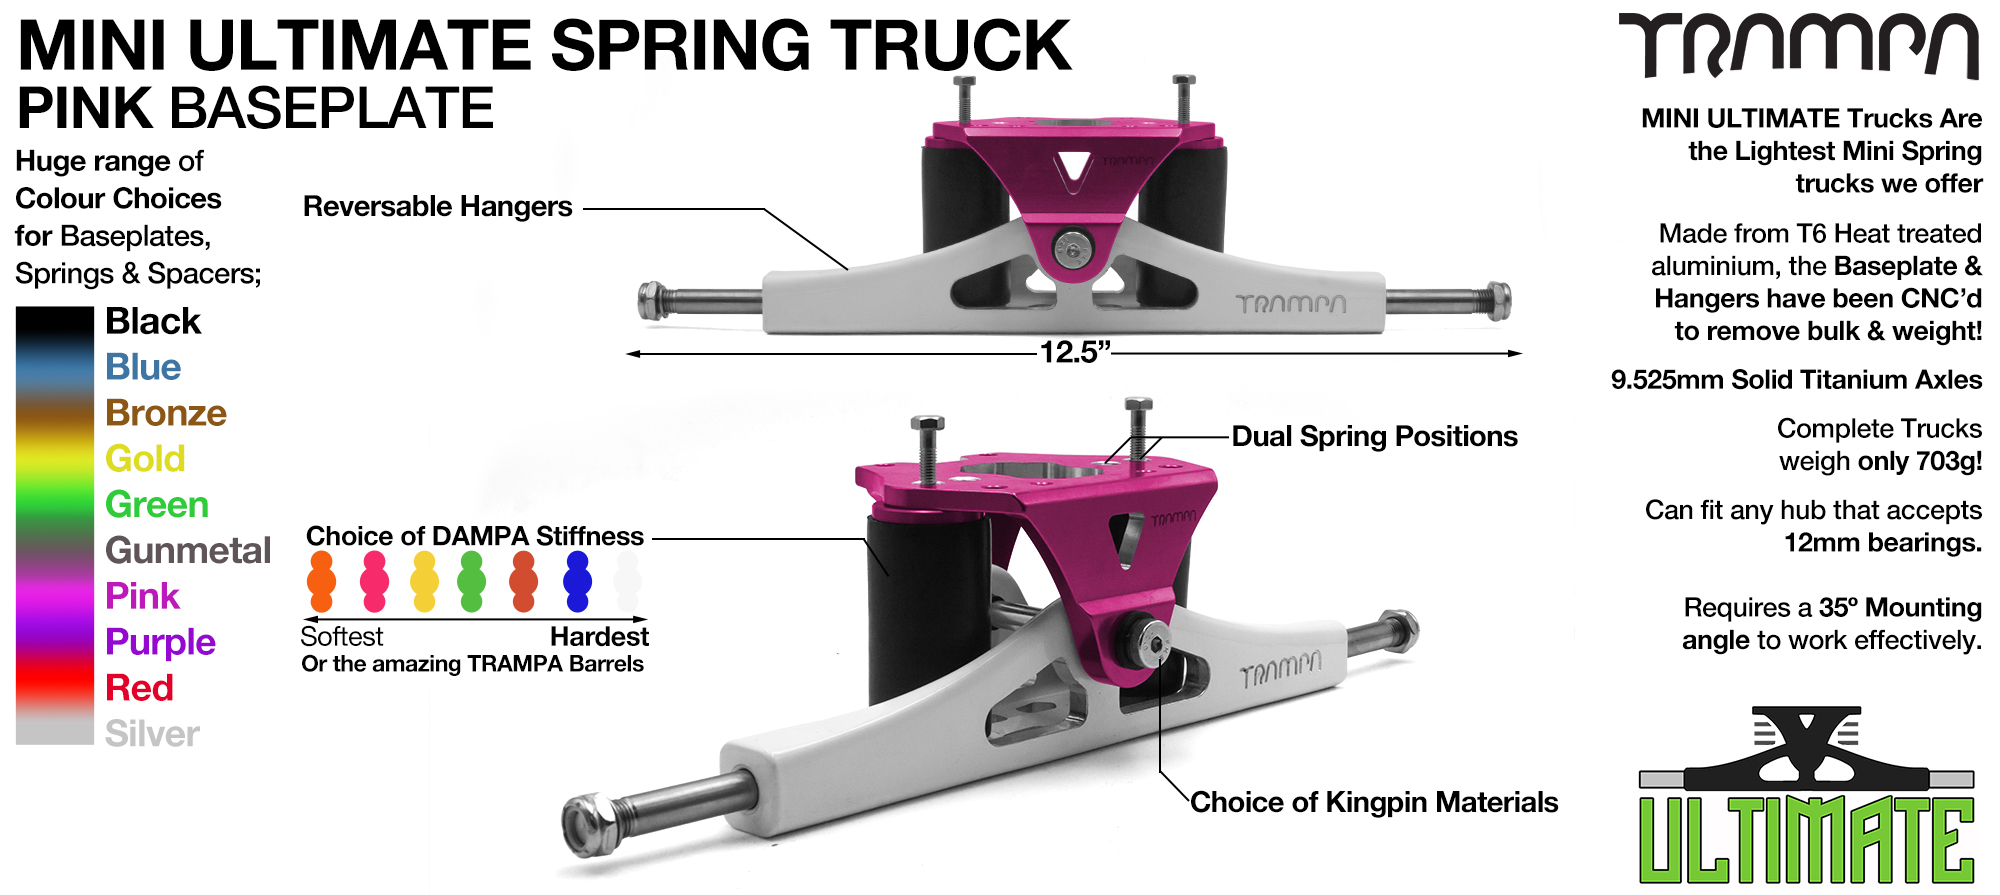 Mini ULTIMATE TRAMPA TRUCKS - CNC FORGED Channel Hanger with 9.525mm TITANIUM Axle CNC Baseplate TITANIUM Kingpin - PINK